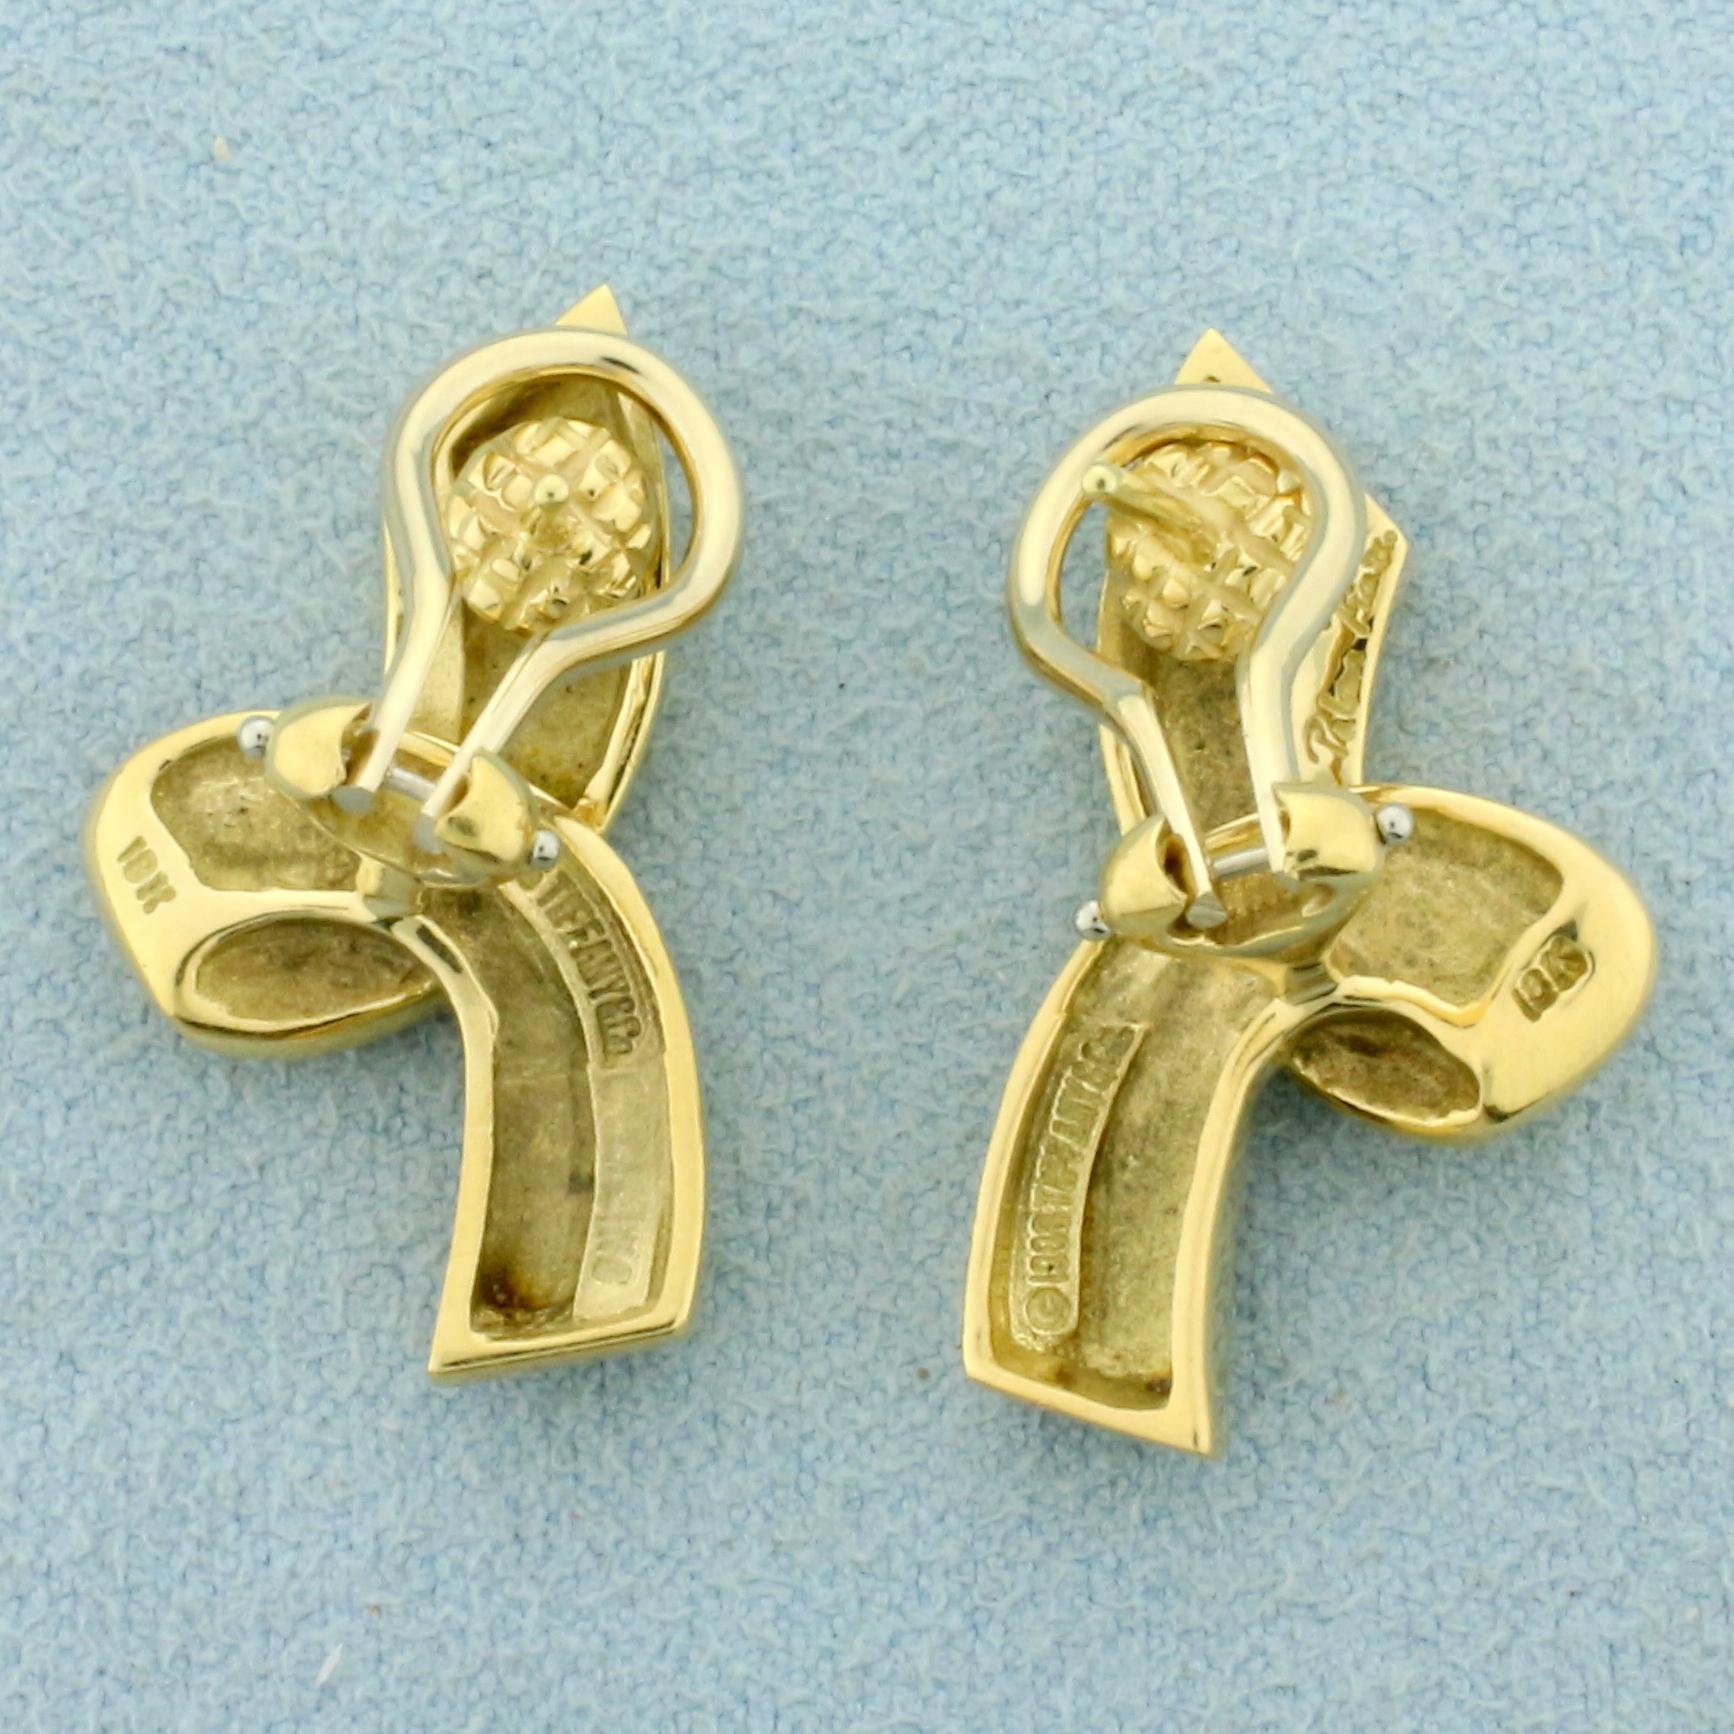 Authentic Tiffany & Co. Paloma Picasso Ribbon Earrings In 18k Yellow Gold